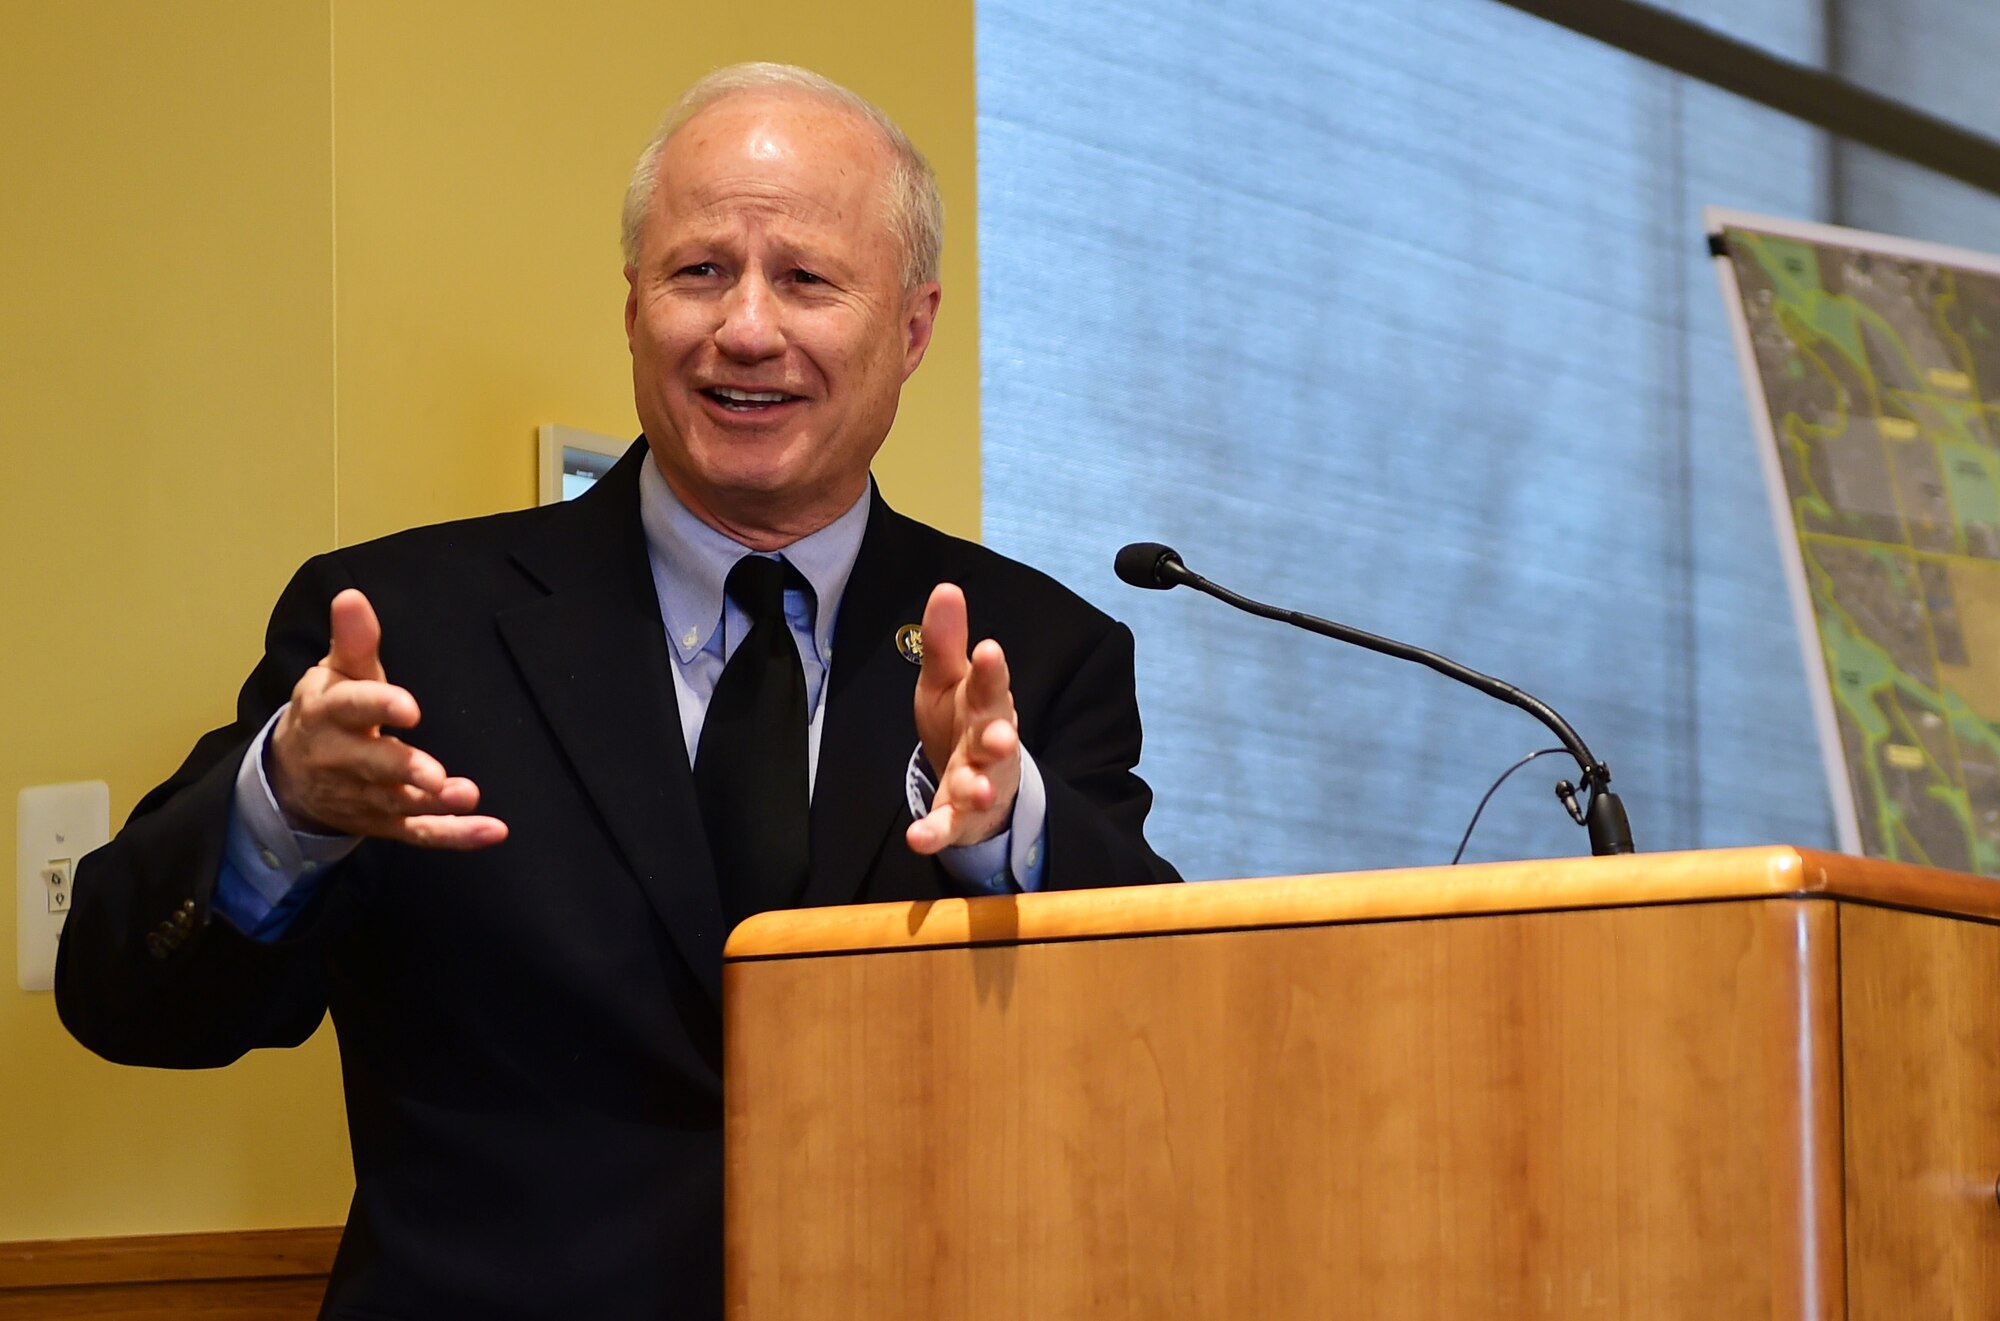 U.S. Rep. Mike Coffman (R-CO), serving the 6th District of Colorado, speaks to Arapahoe County citizens during a Readiness and Environmental Protection Integration program celebration March 9, 2016, at the Arapahoe Center Point Plaza in Aurora, Colo. The Compatible Use Buffer Project provided connectivity of natural resources and recreational trails around the base, supporting new and existing regional planning objectives. (U.S. Air Force photo by Senior Airman Racheal E. Watson/Released)